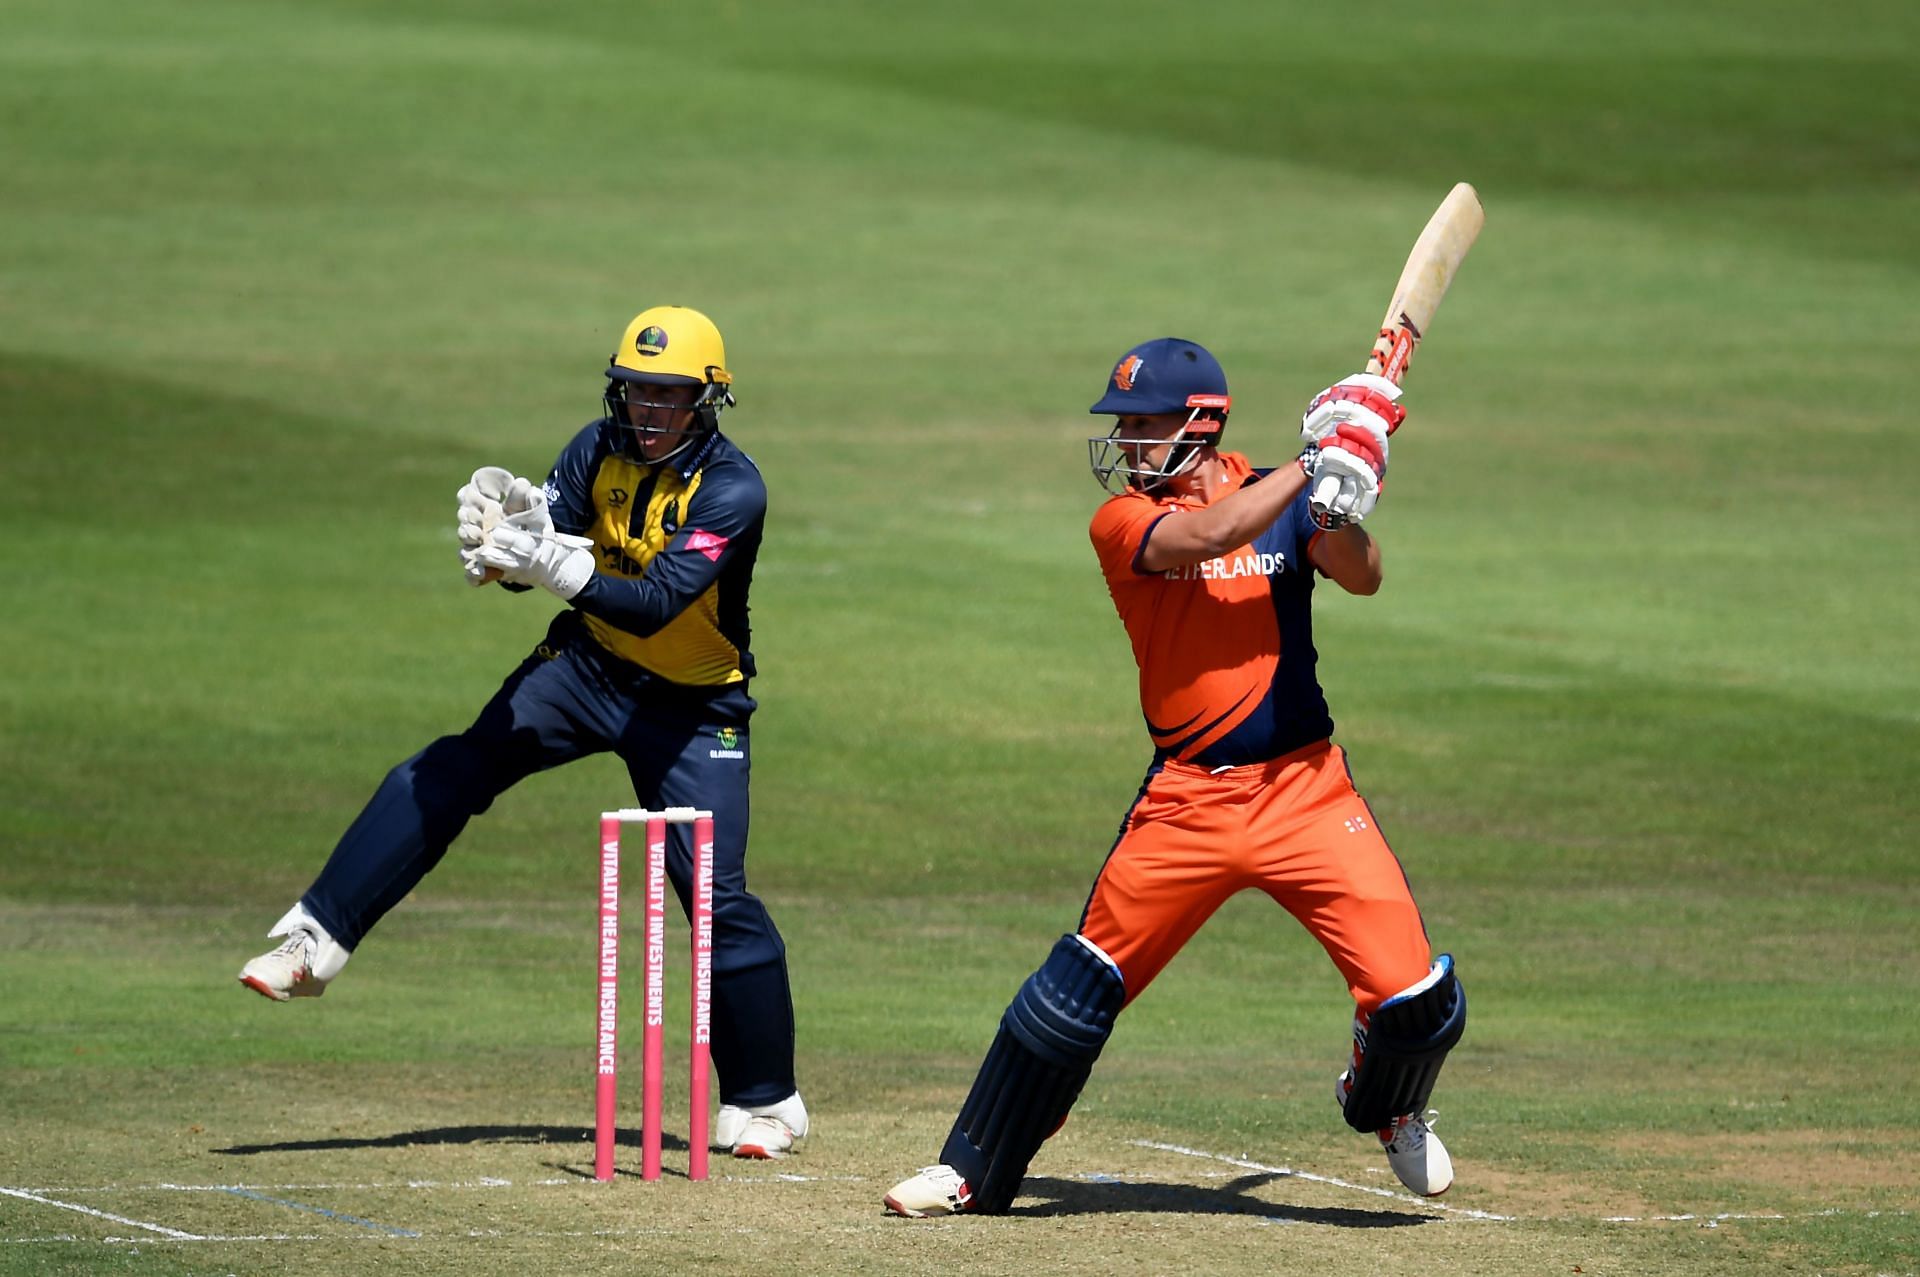 Pieter Seelaar in action in Glamorgan v The Netherlands - T20 Friendly Match